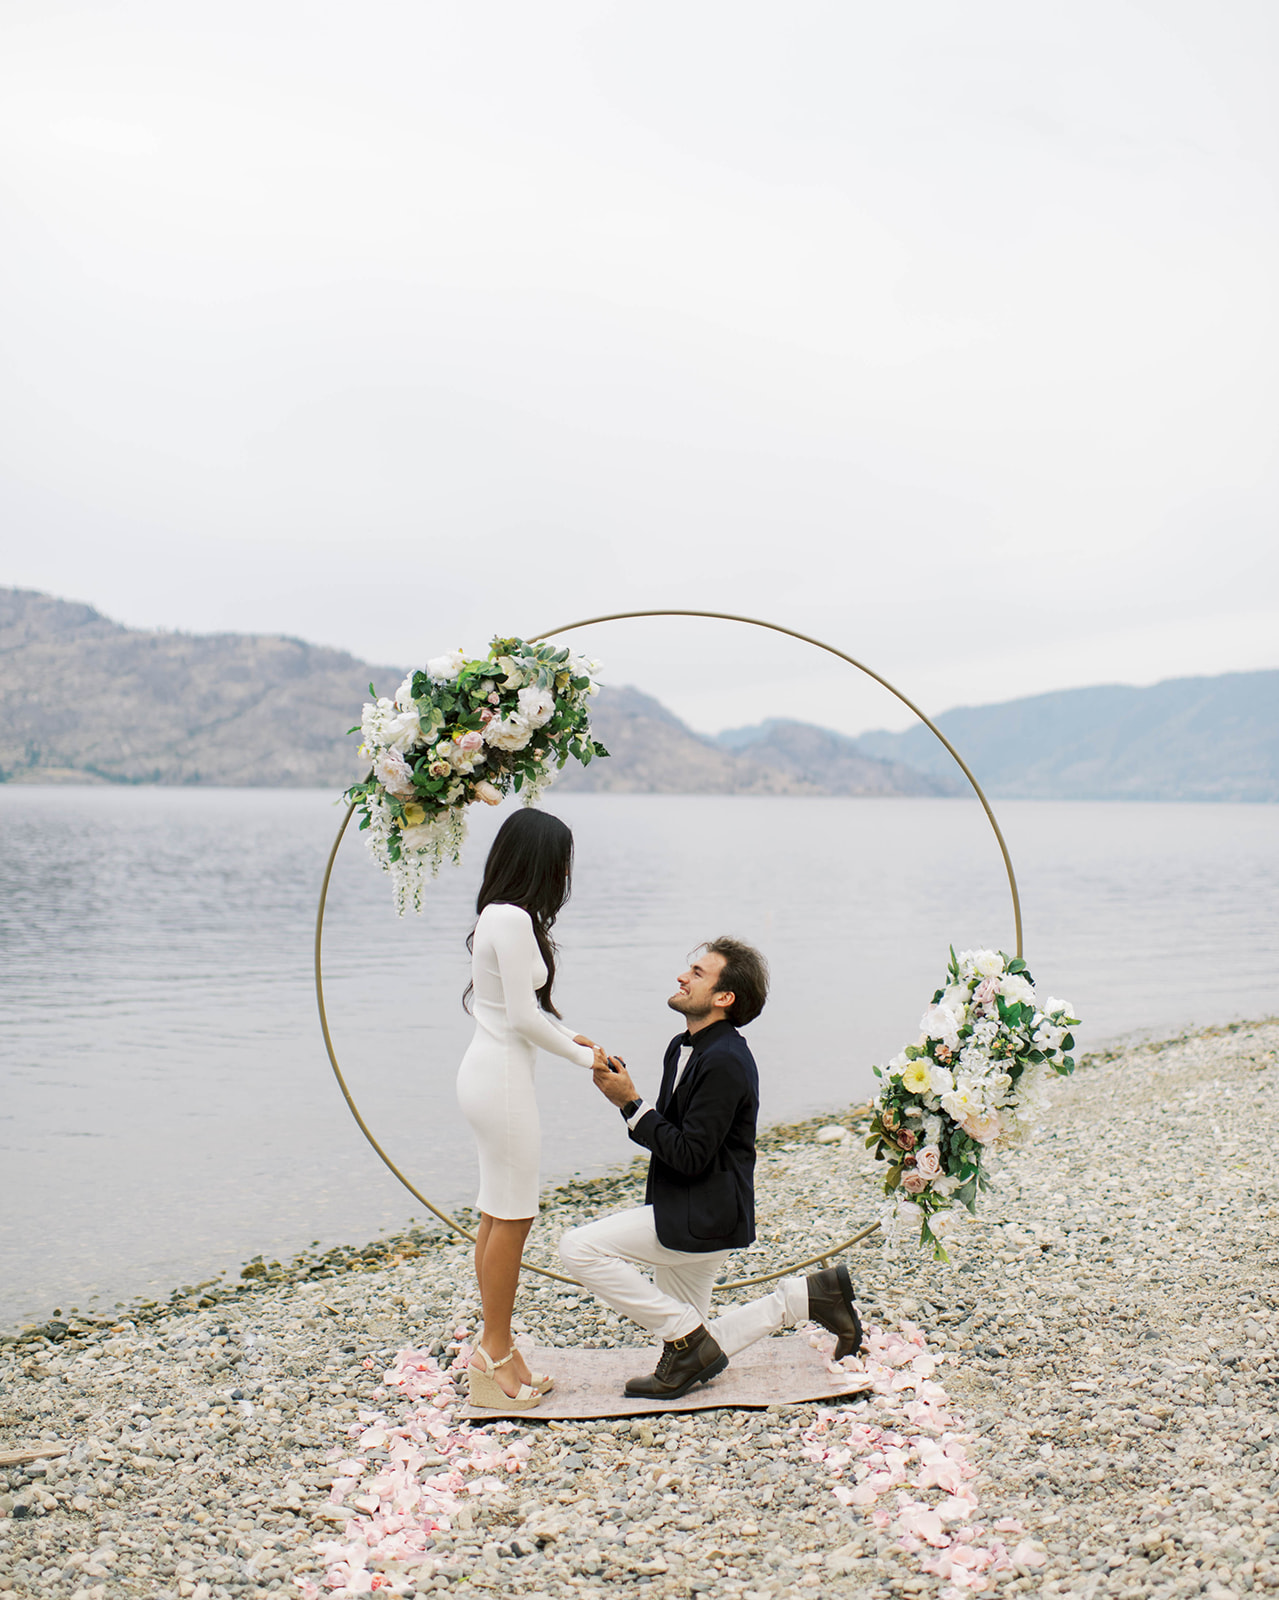 Perfectly Planned Romantic Proposal at Peachland Beach, in the Okanagan Valley, captured on film by Kelowna Wedding Photographer, Minted Photography. - Peachland beach, Kelowna proposal, kelowna wedding photographer, beach proposal